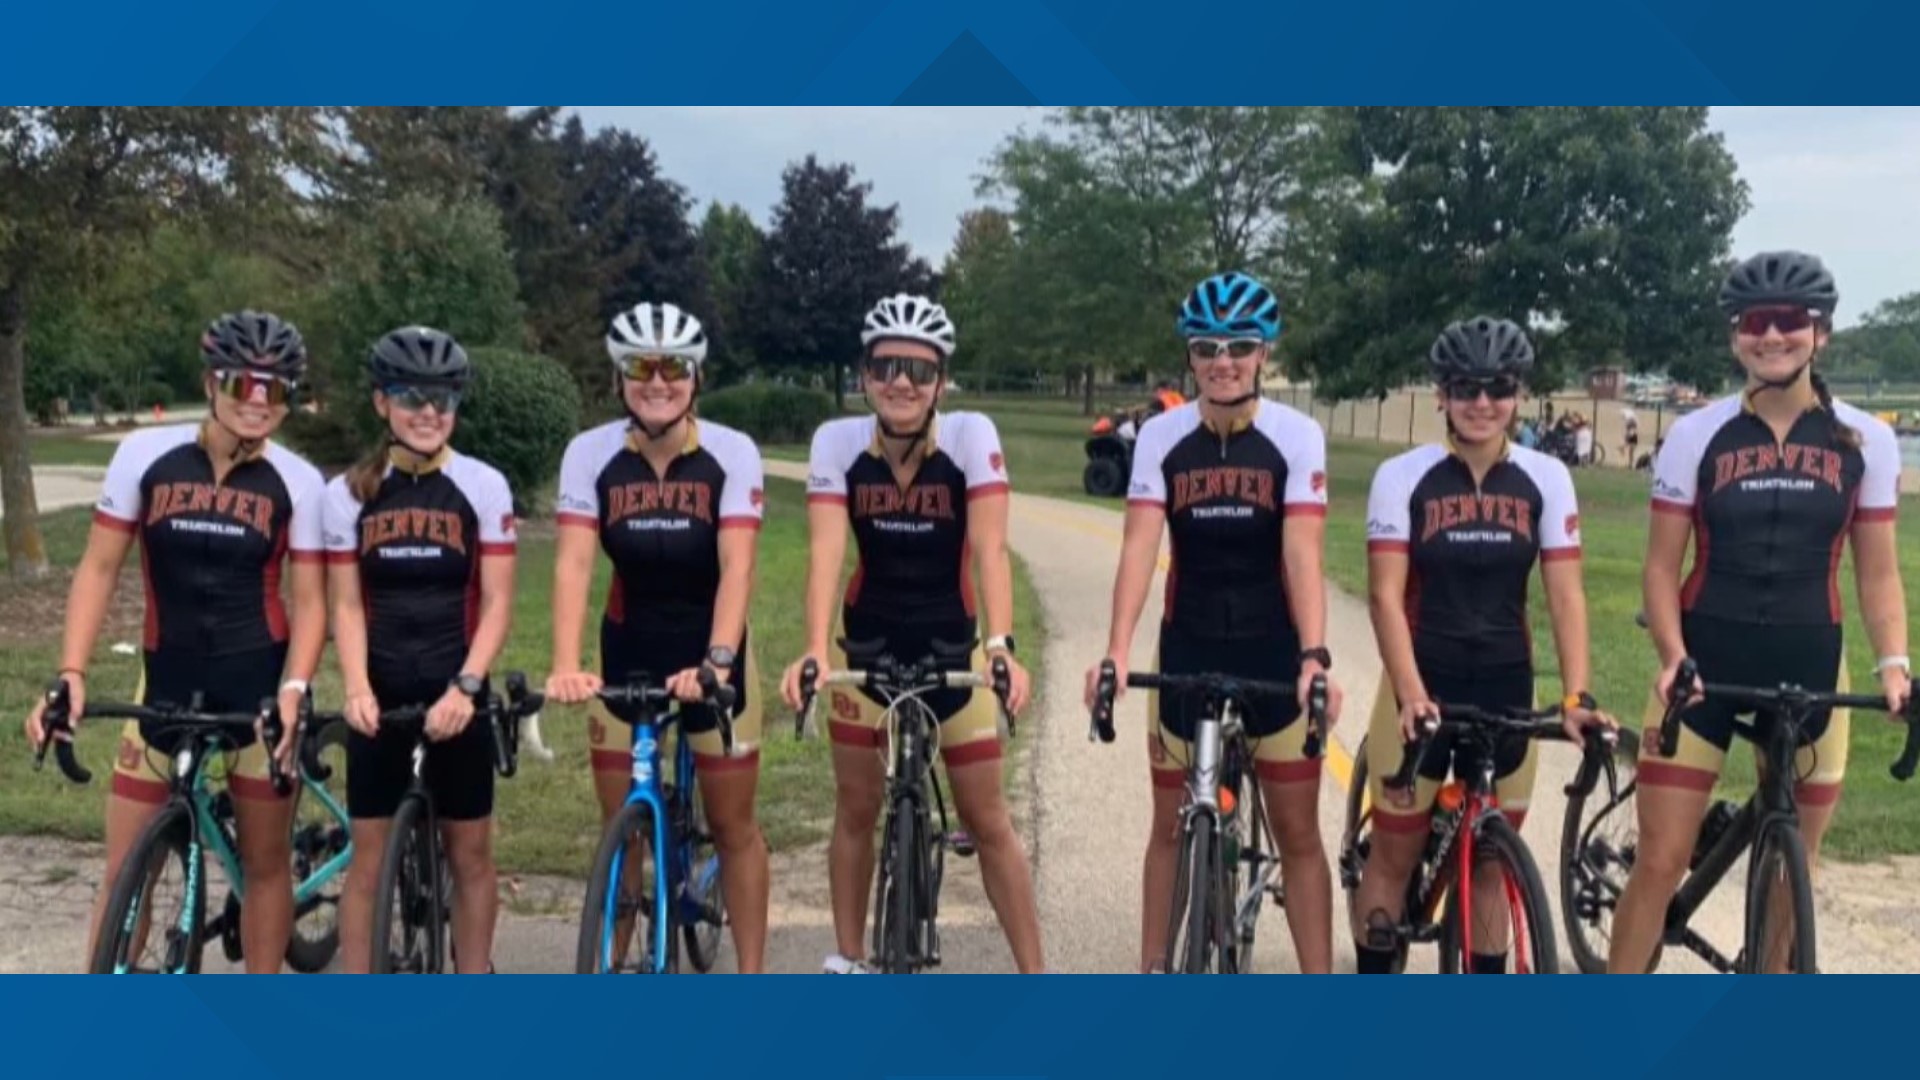 In their inaugural season as a varsity team, the University of Denver women's triathlon team is already blazing trails and setting expectations high.